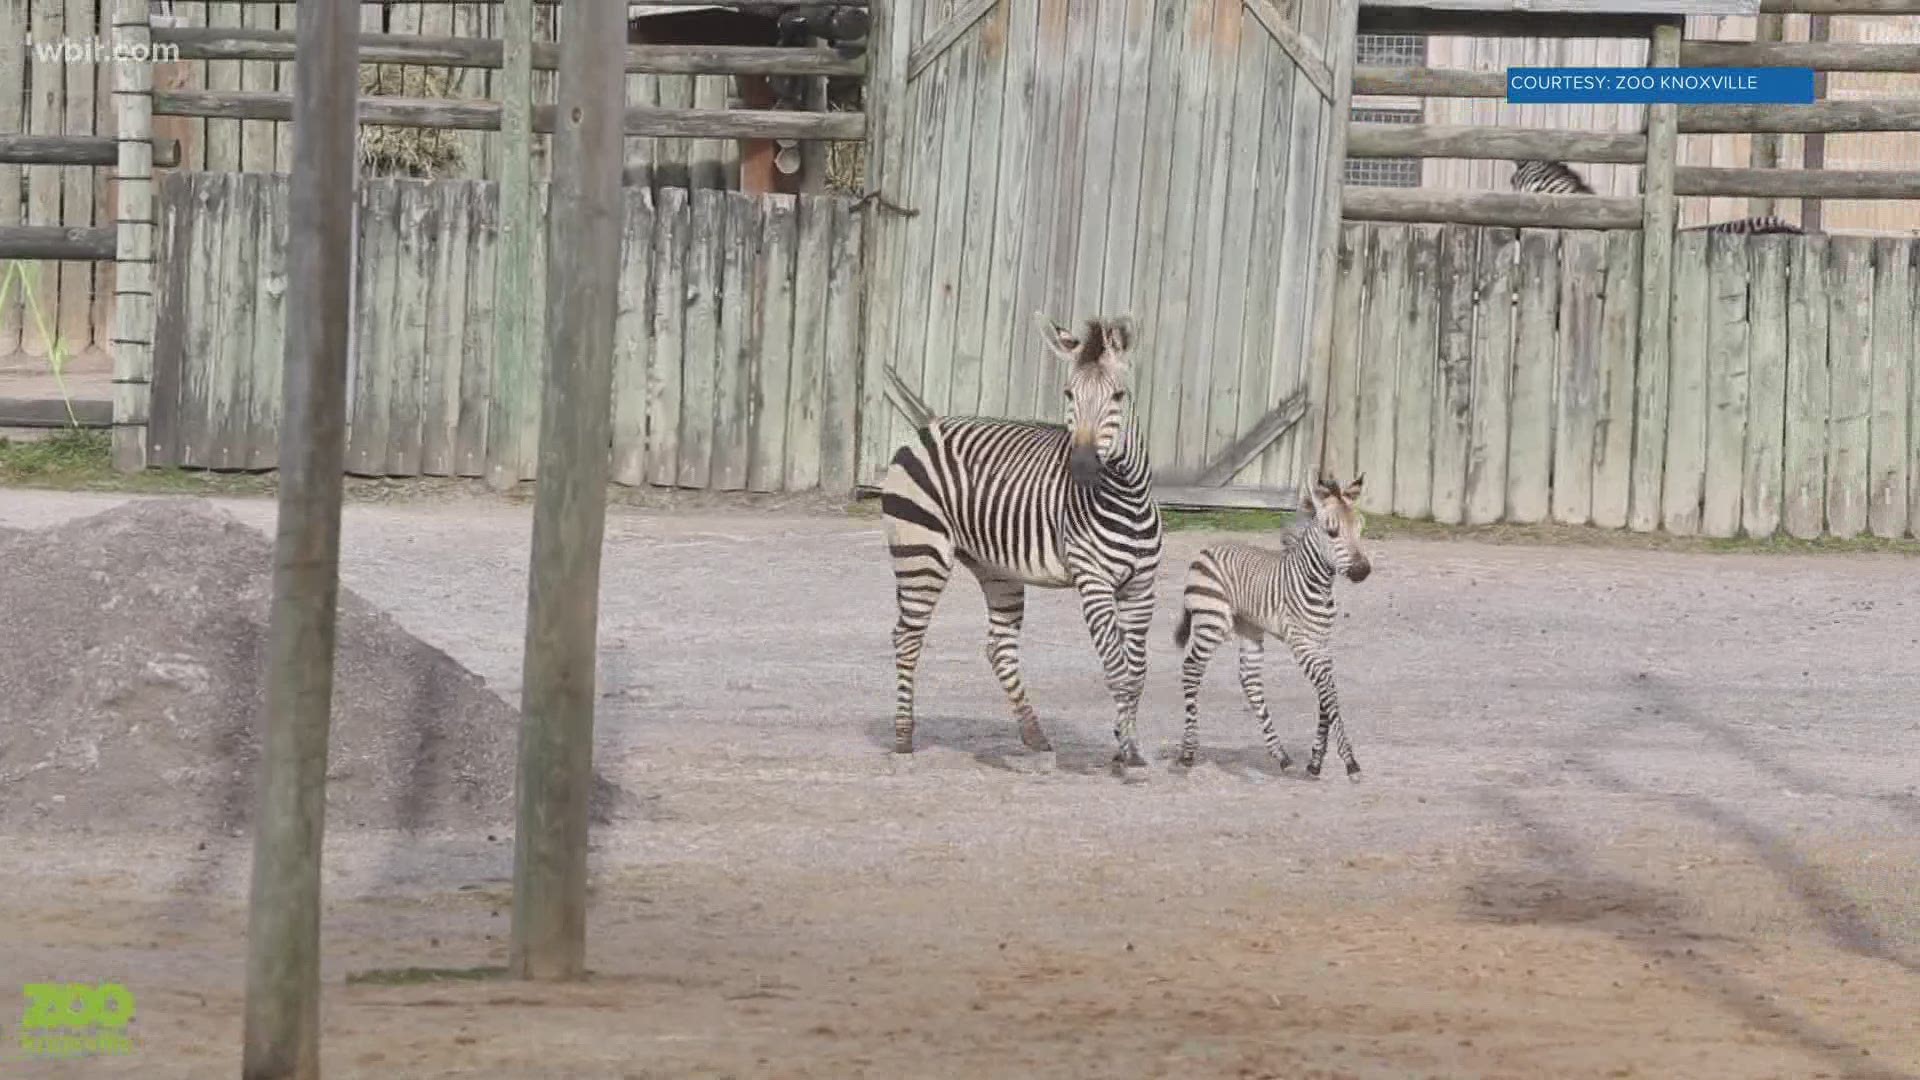 Zoo Knoxville welcomed a baby zebra and giraffe in late December. Here's an update on their cuteness. Jan. 12, 2021-4pm.